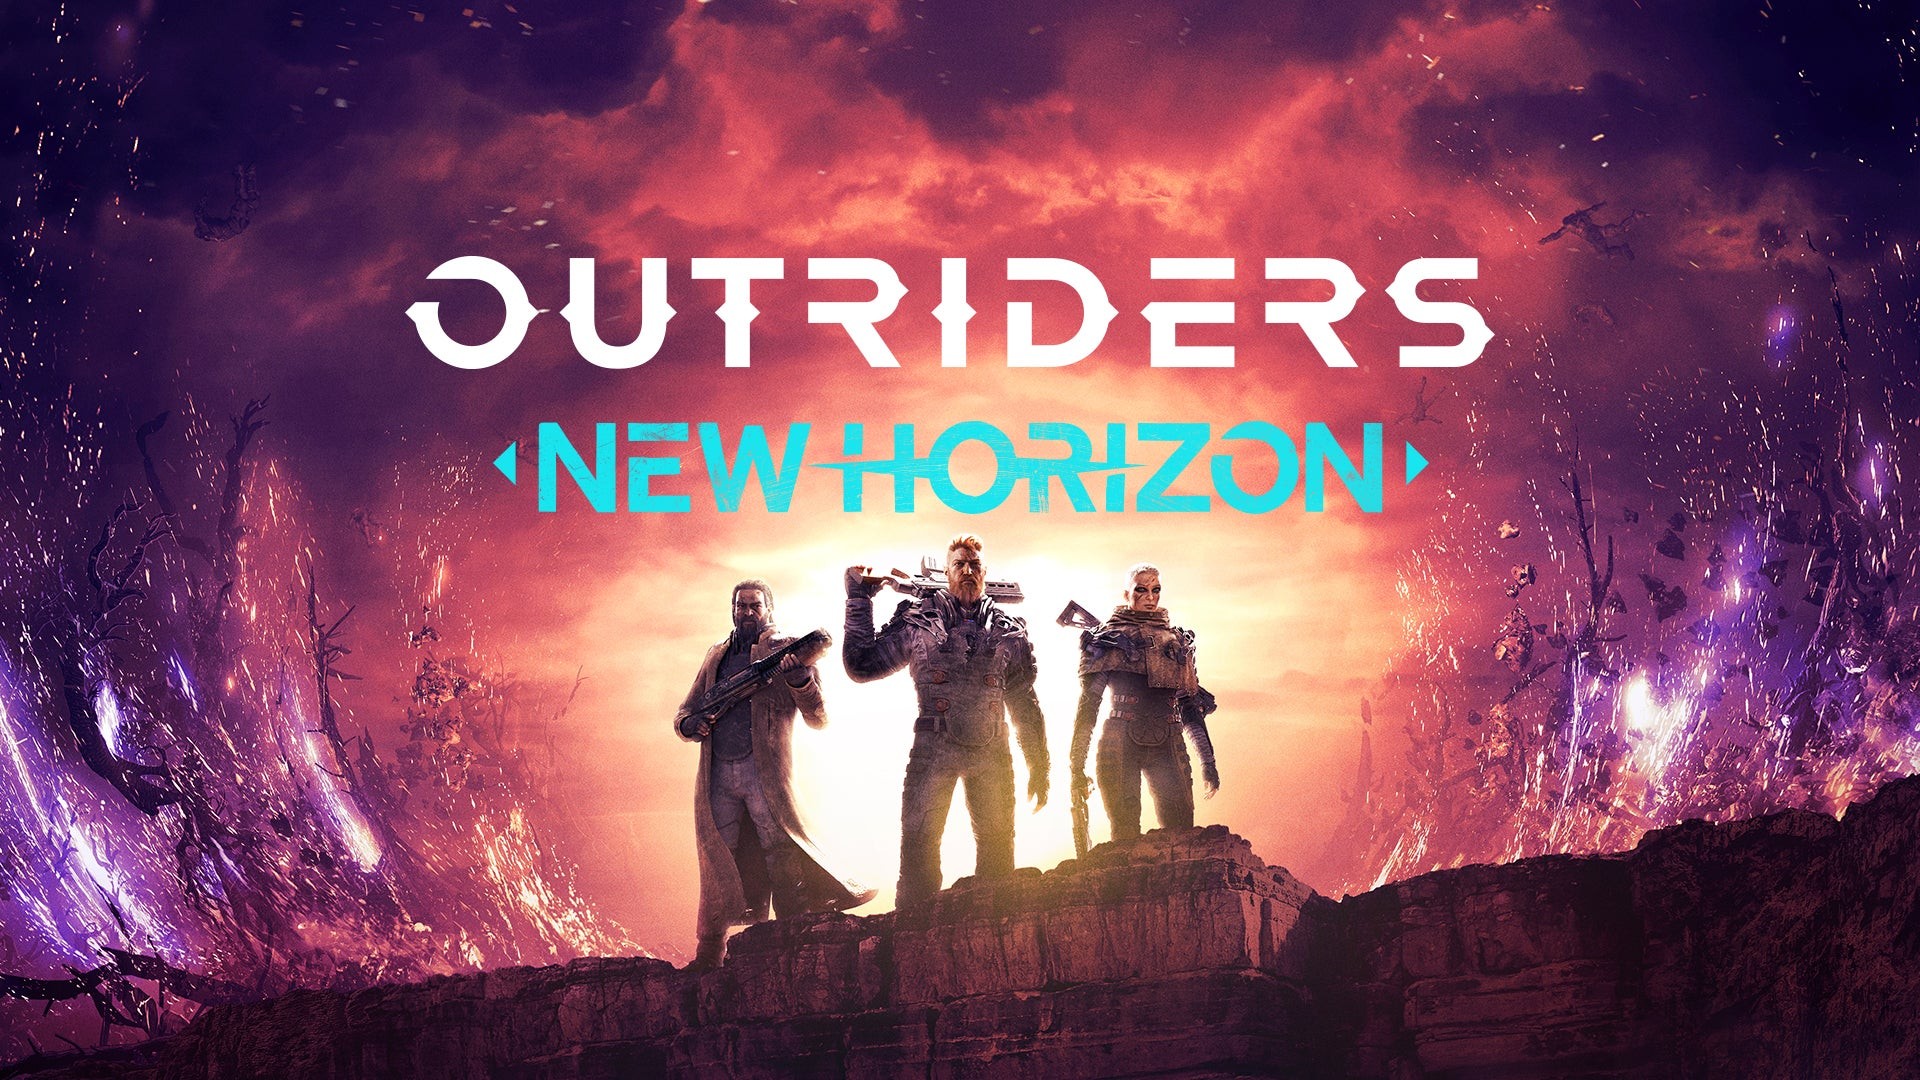 Outriders New Horizon Update Available on November 17